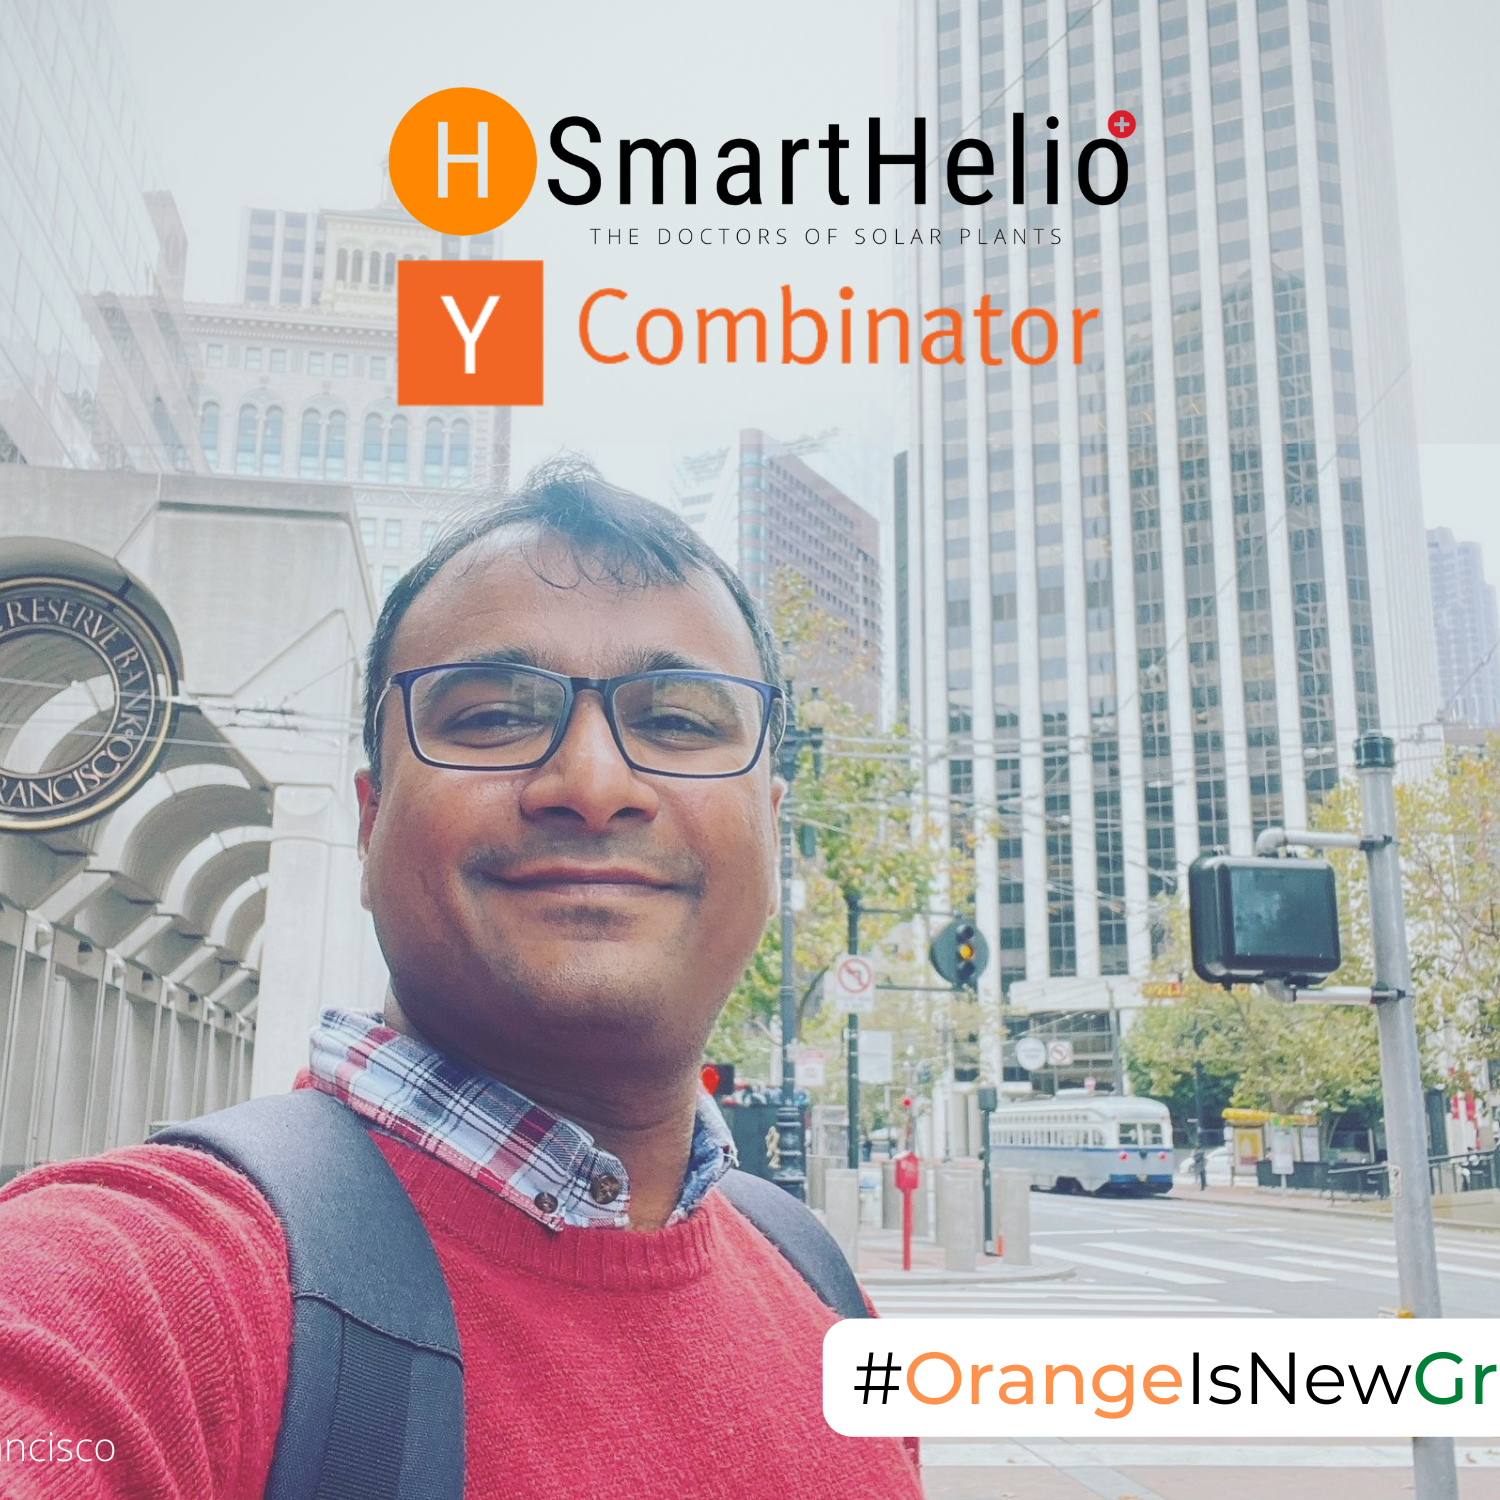 SmartHelio all set for the Y Combinator Demo Day